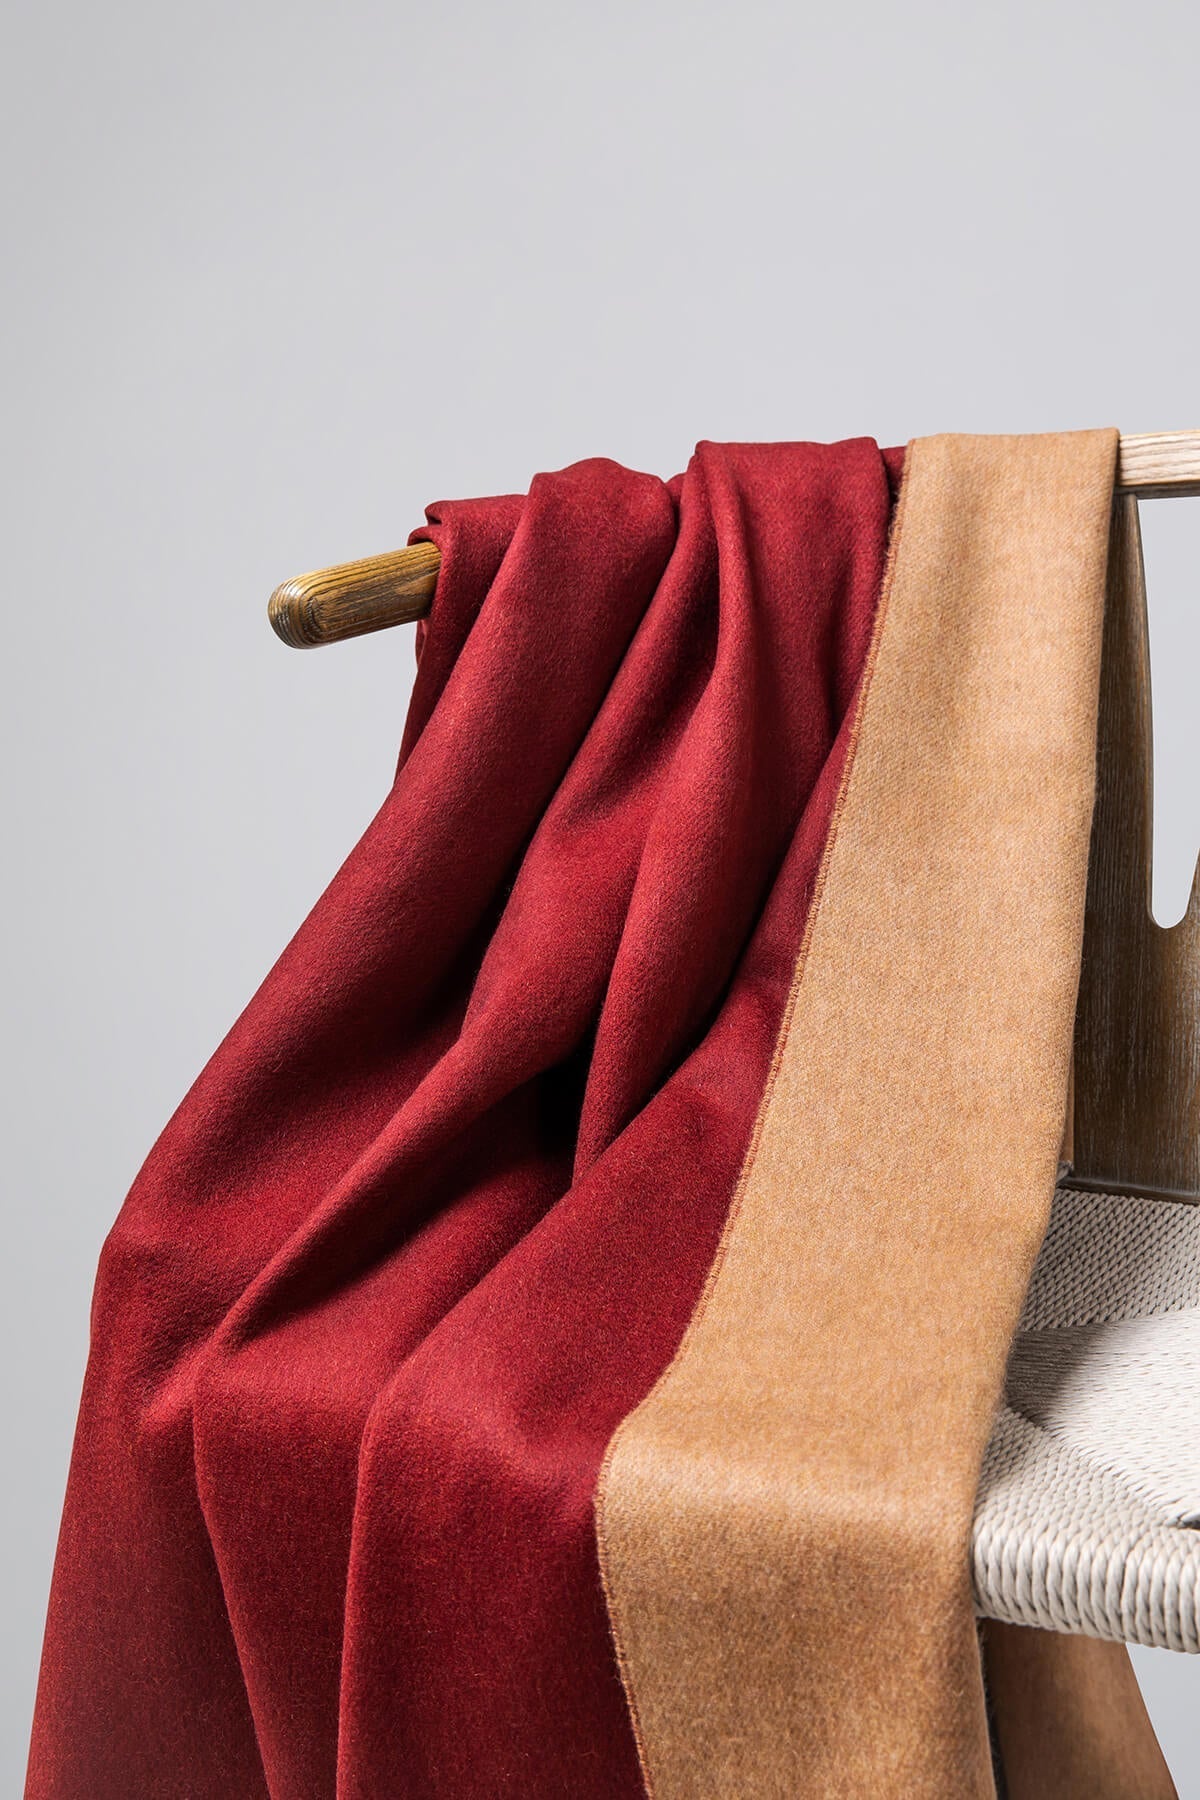 Detail of Johnstons of Elgin Reversible Pure Cashmere Throw in Claret & Fawn draped over a wooden chair on a white background WA000013RU7256ONE